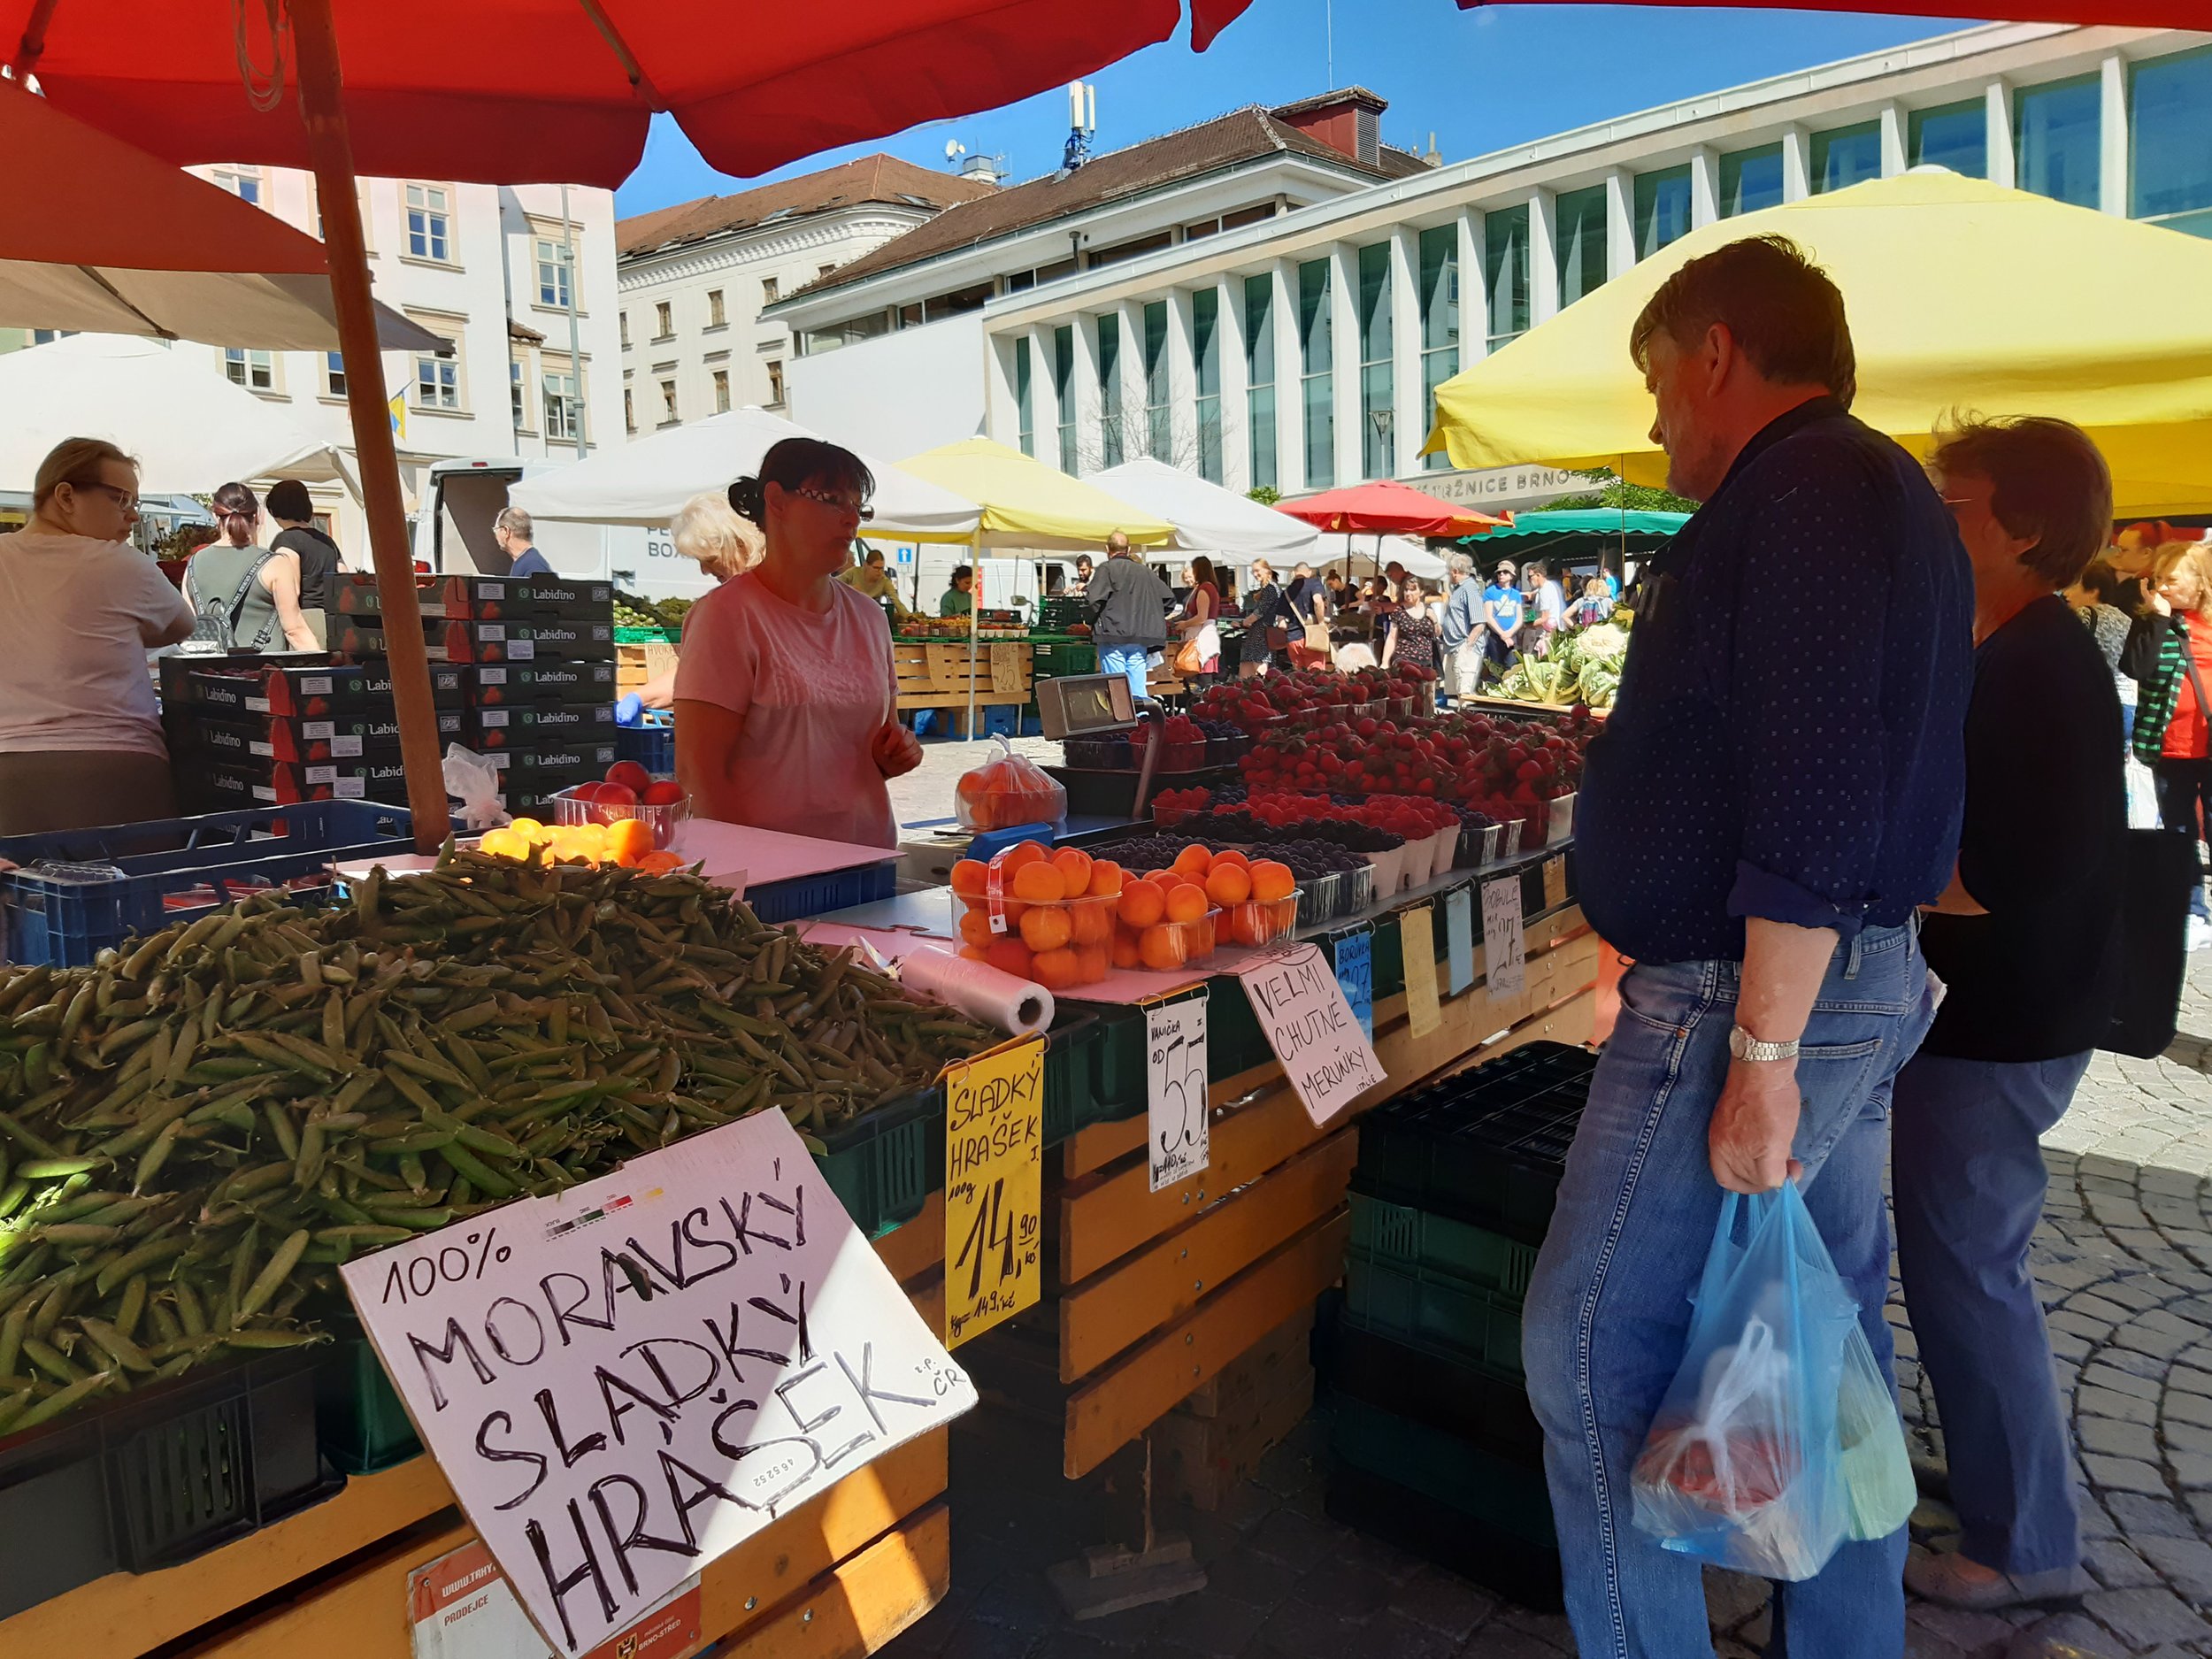 farmers and stallholders sell their fruit, veg and fl owers at a daily market in the centre of Brno.